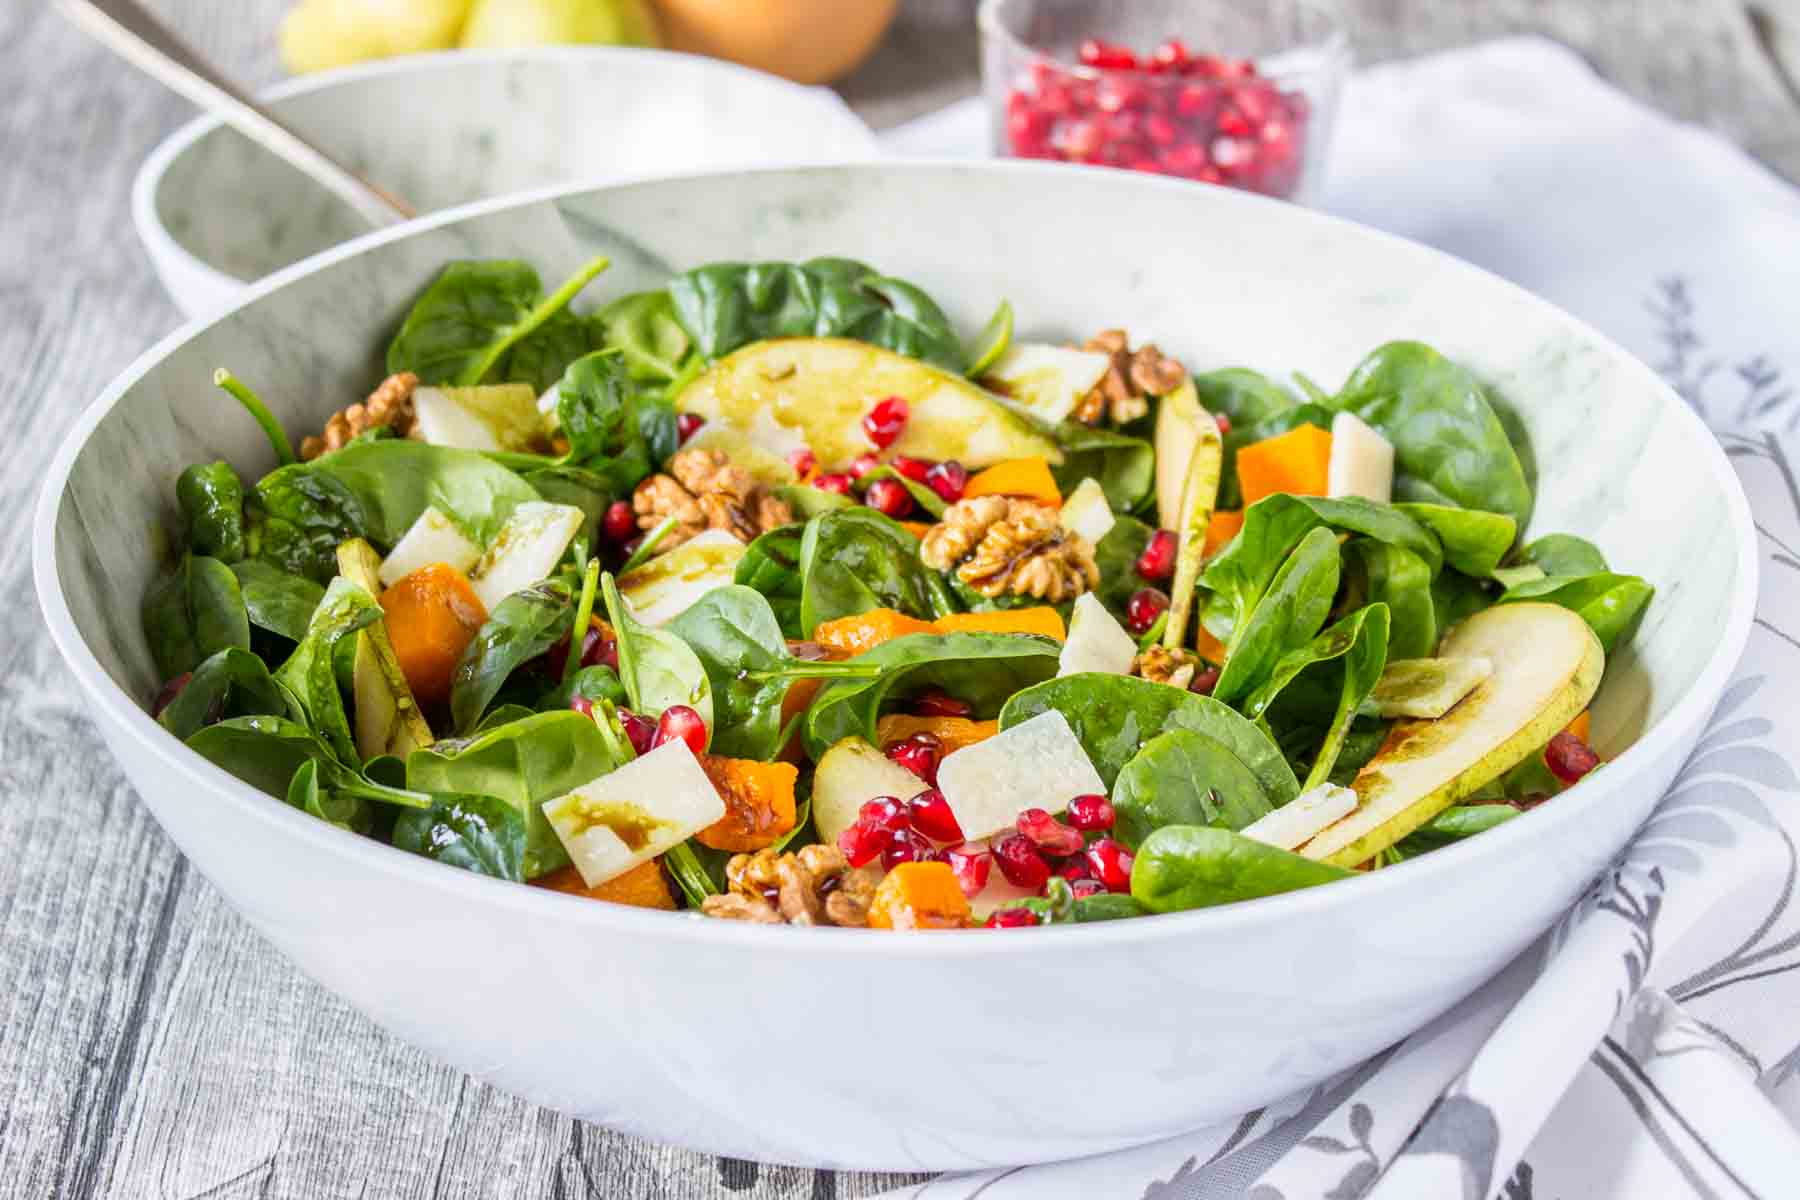 Pumpkin Pear Salad with baby spinach and walnuts topped with cheese and seeds served in a bowl